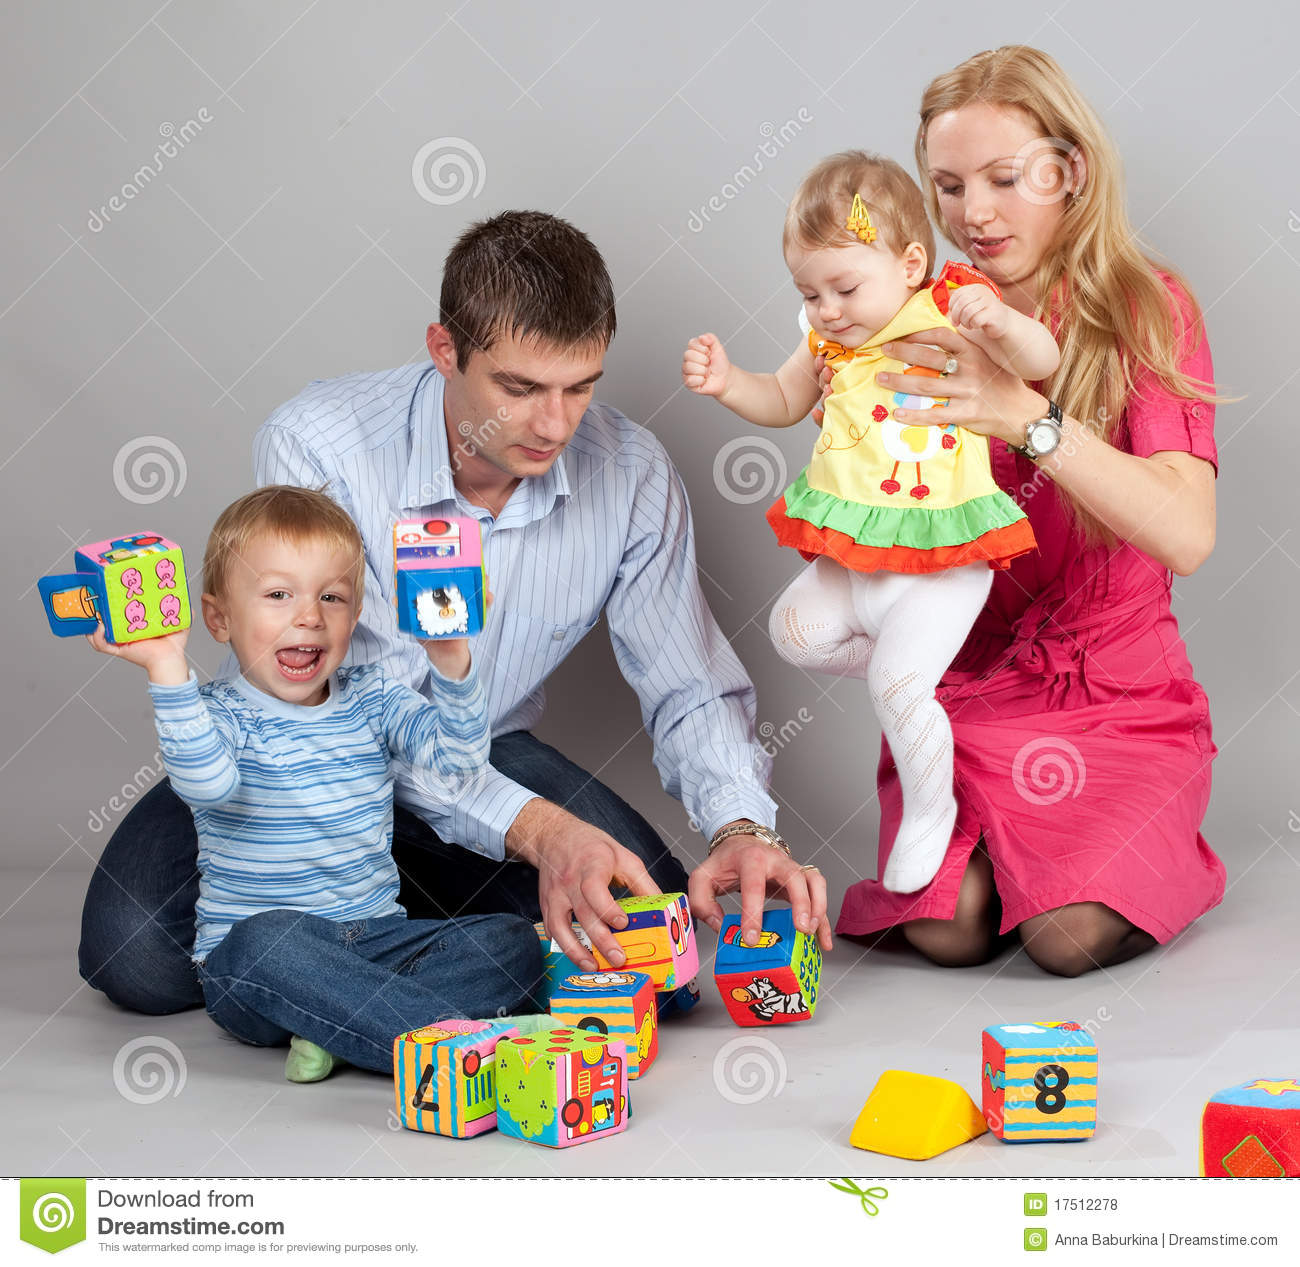 Family Playing Together Royalty Free Stock Photos   Image  17512278